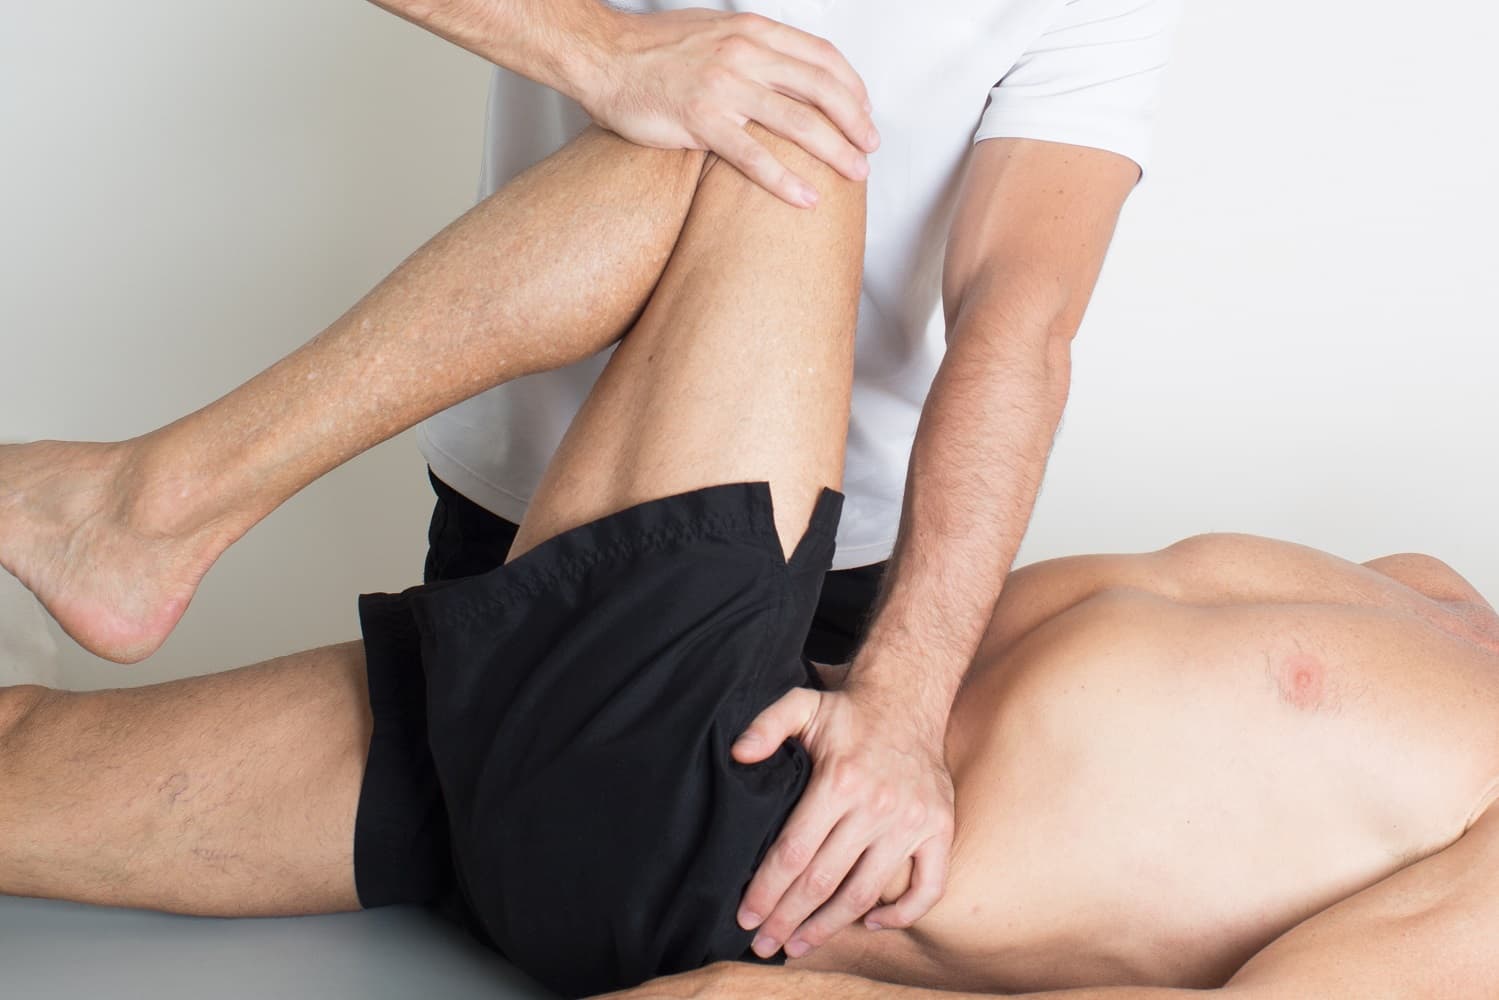 What is Rolfing?